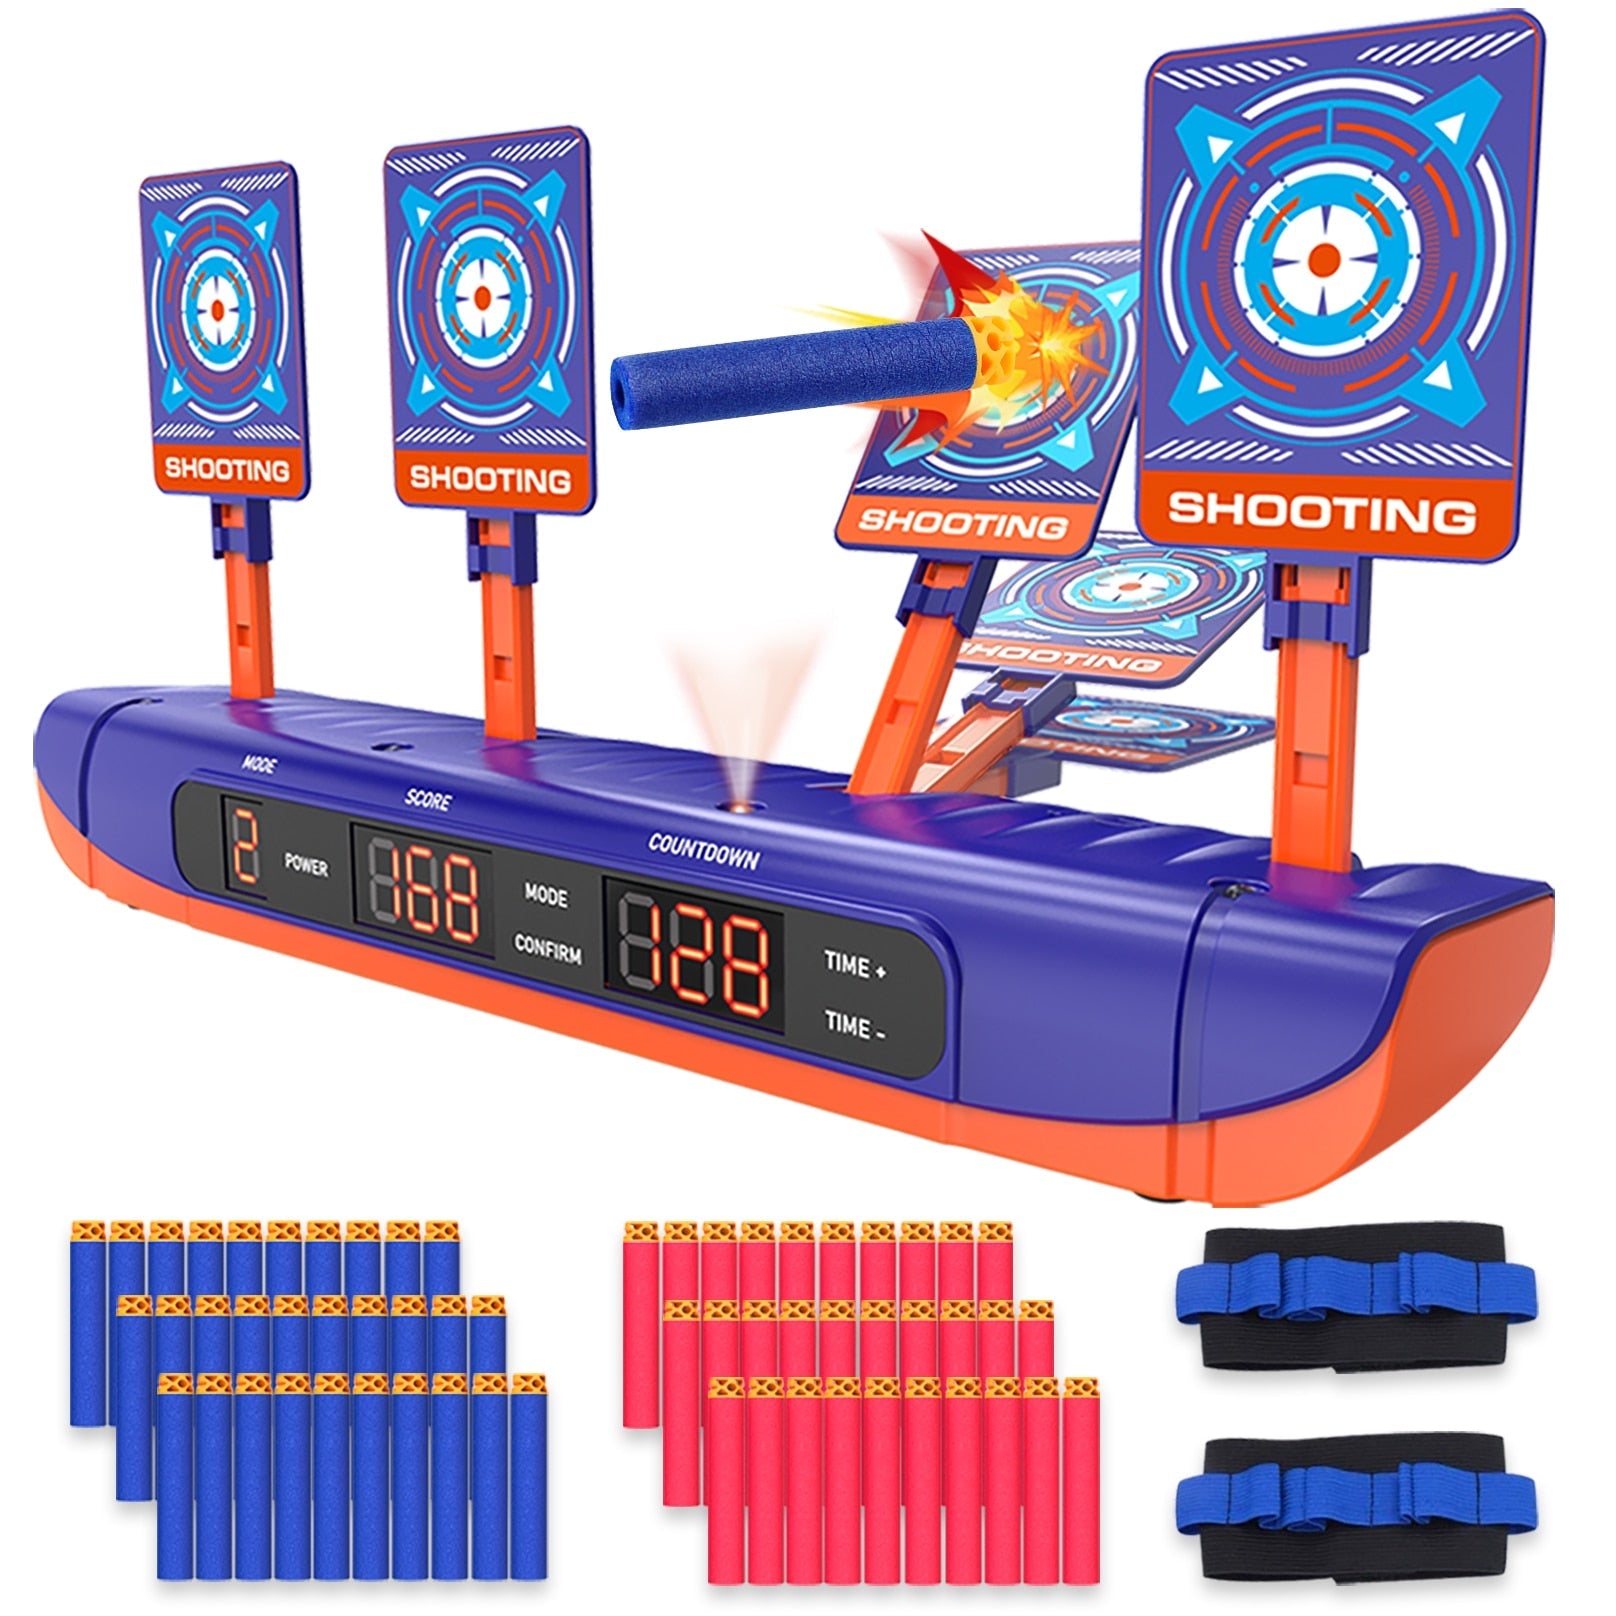 Electric Auto Reset Shooting Target for Nerf Guns - Pink & Blue Baby Shop - Review